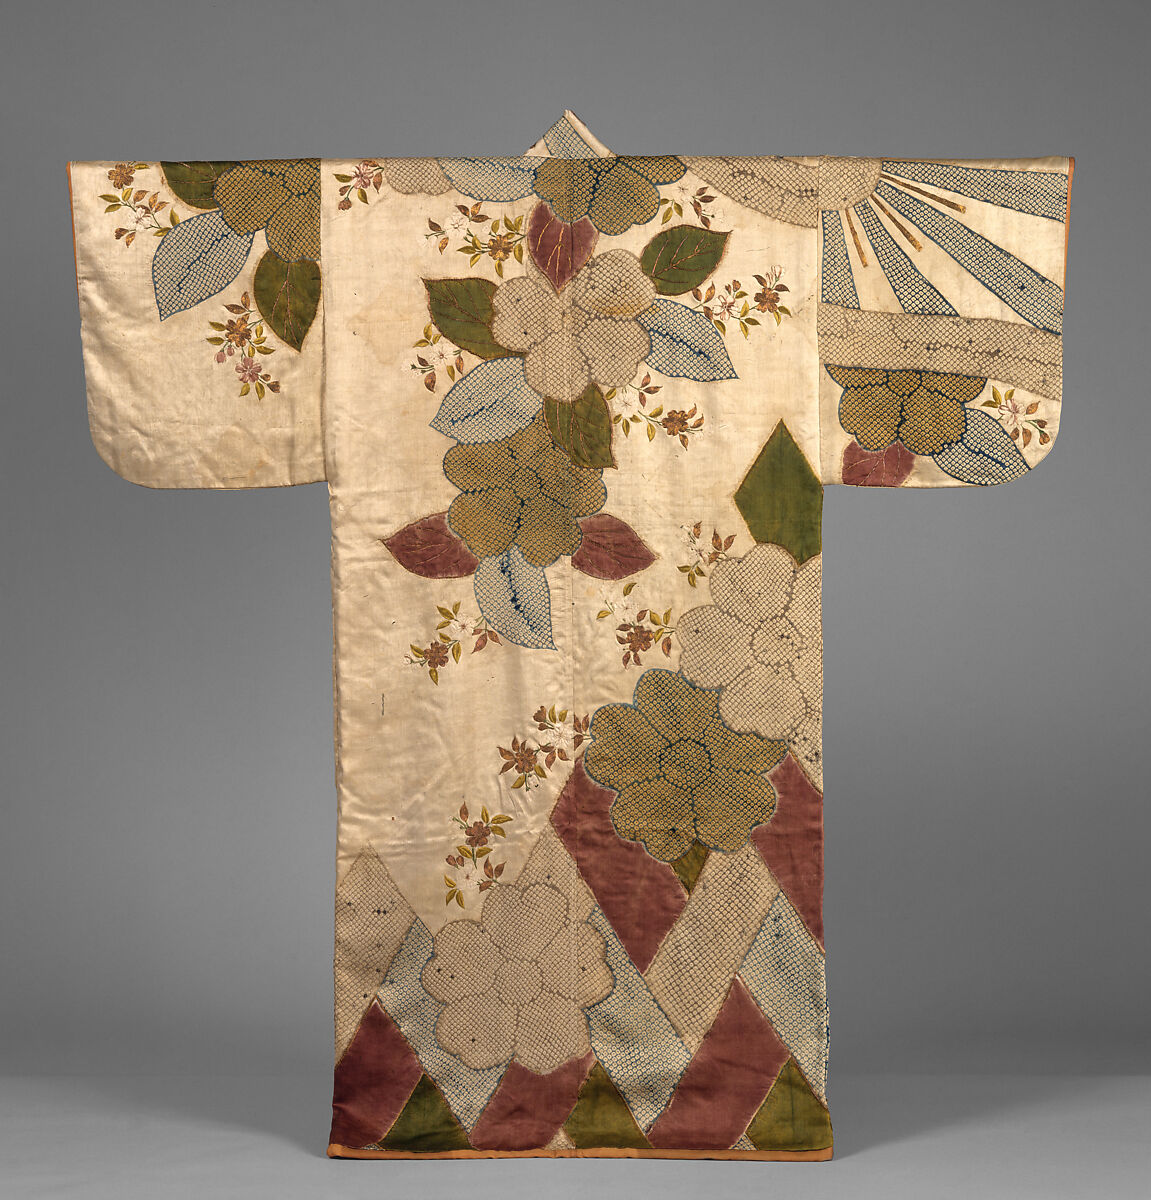 Robe (Kosode) with Cherry Blossoms and Cypress Fence

, Silk and metallic thread embroidery with resist dyeing on satin damask, Japan